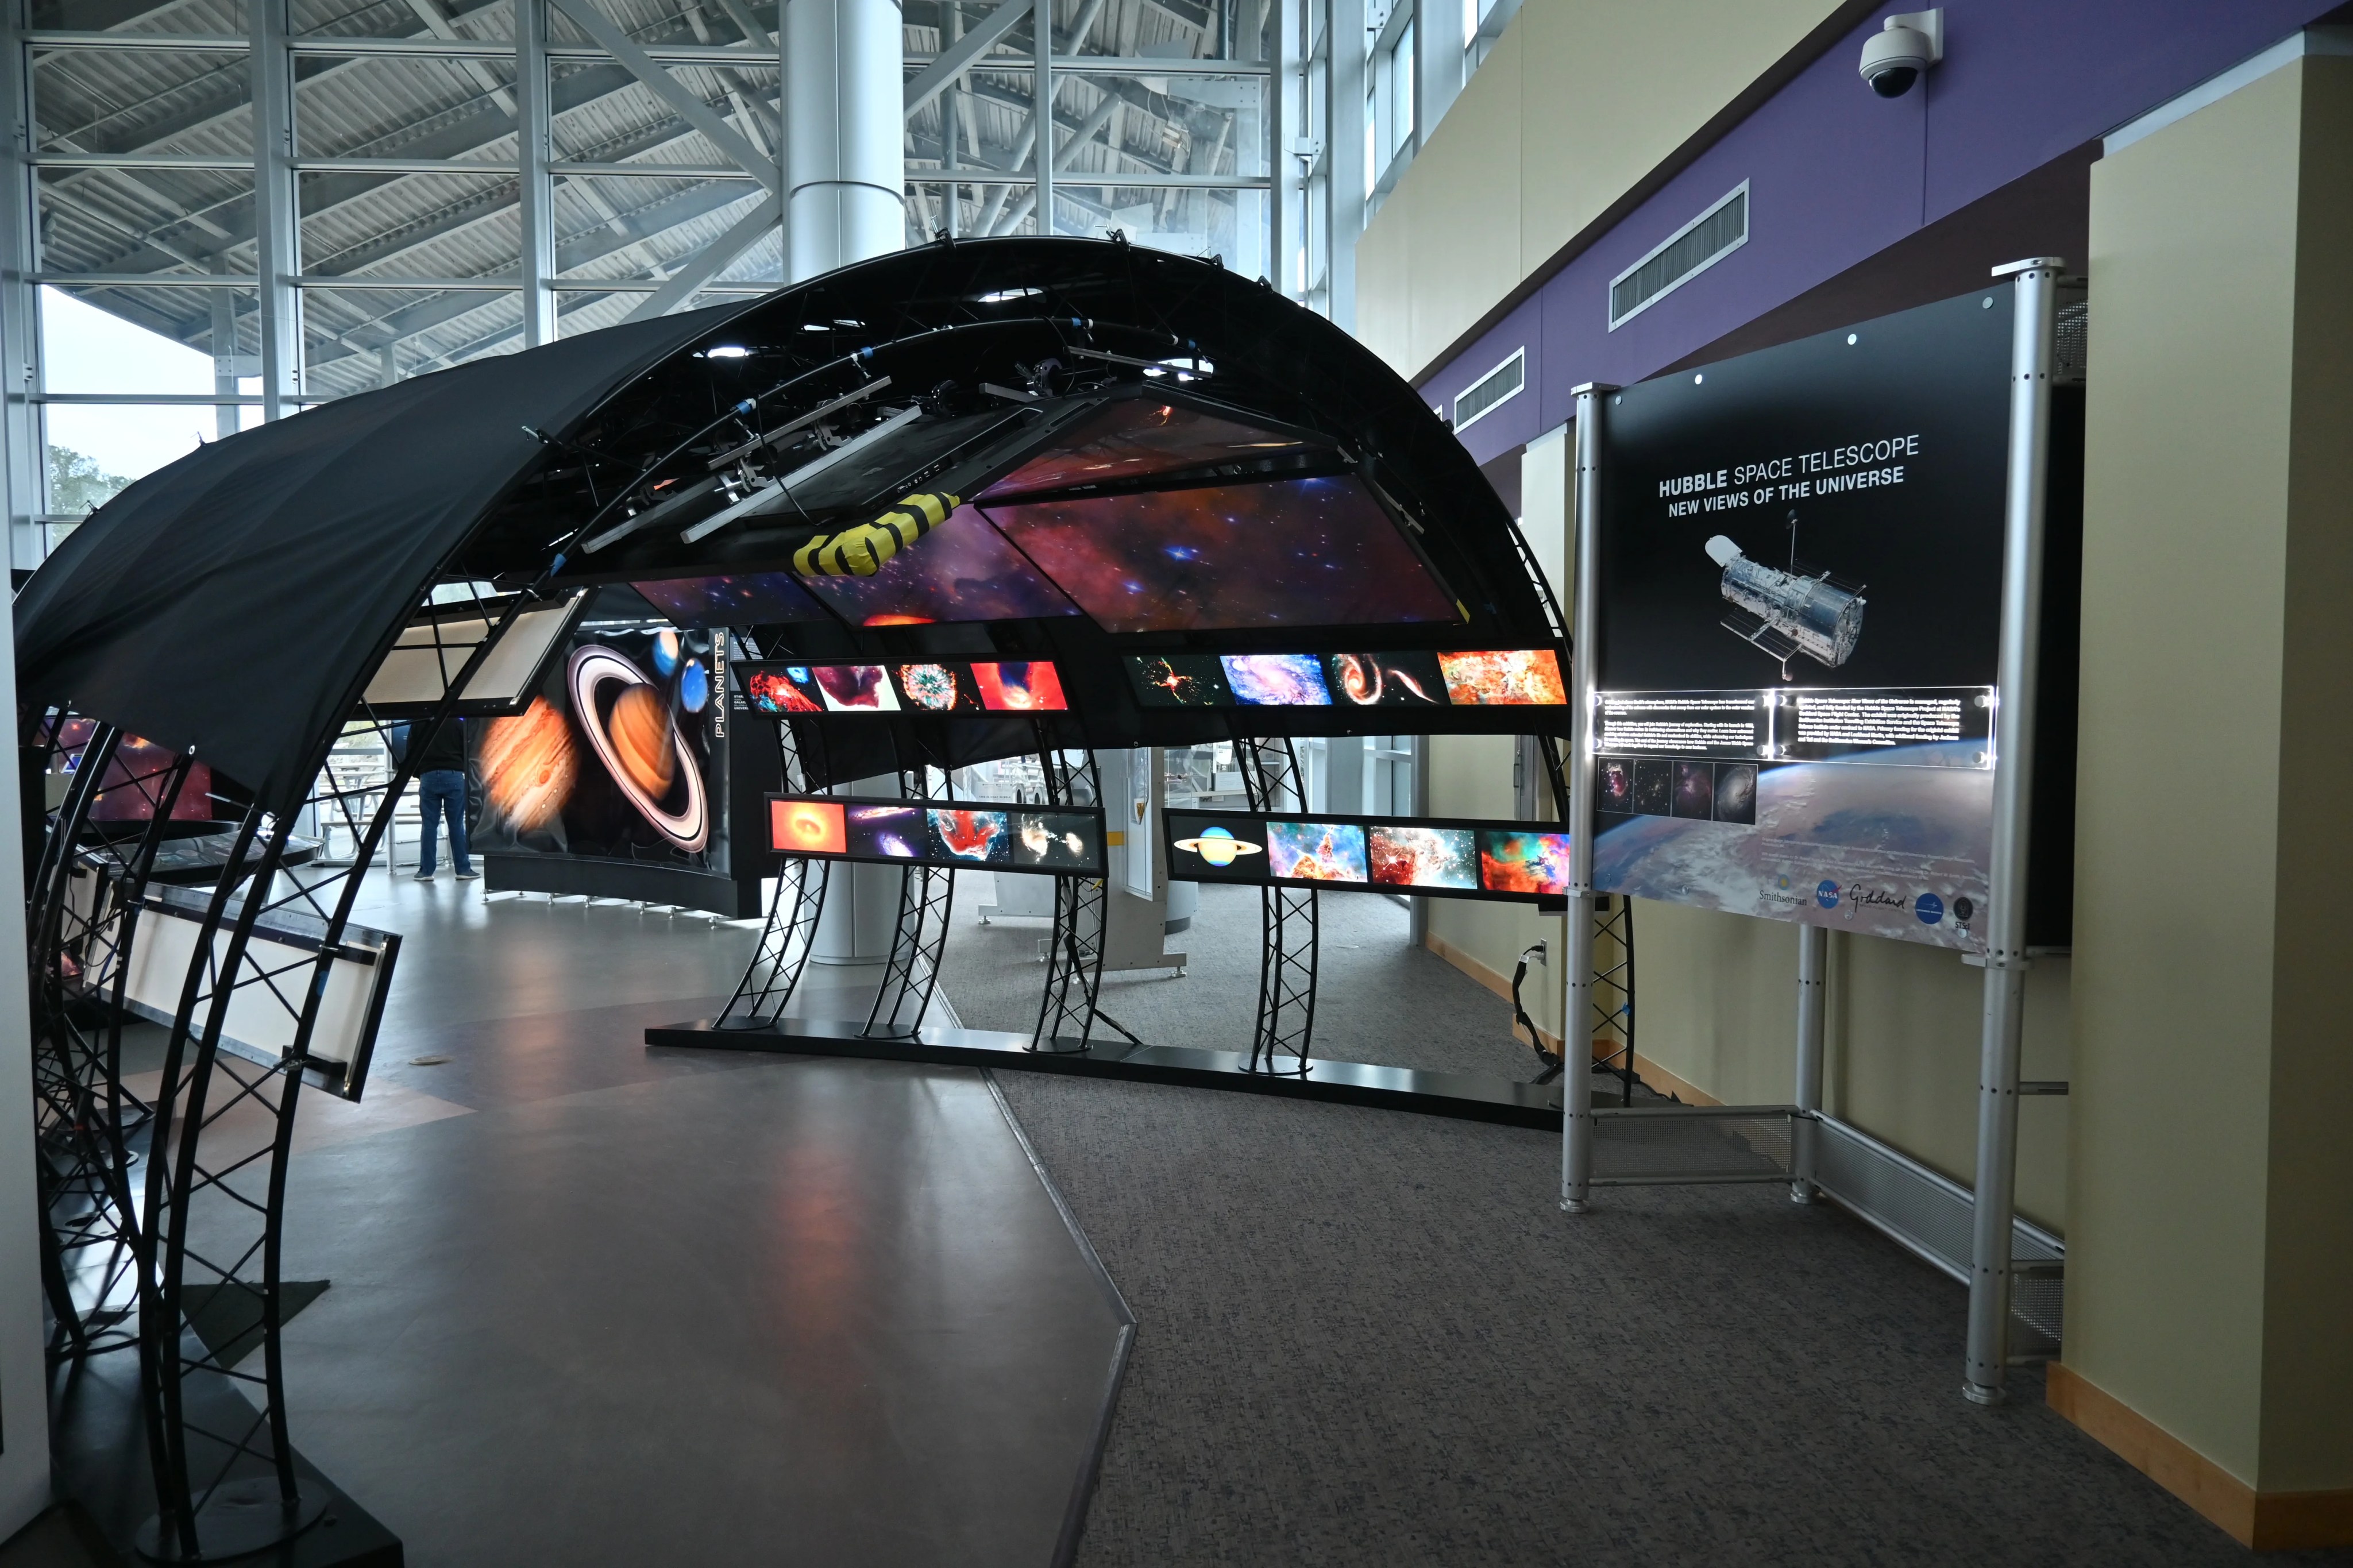 An interaction panel and tunne of Hubble images at the entryway of the Hubble traveling exhibit